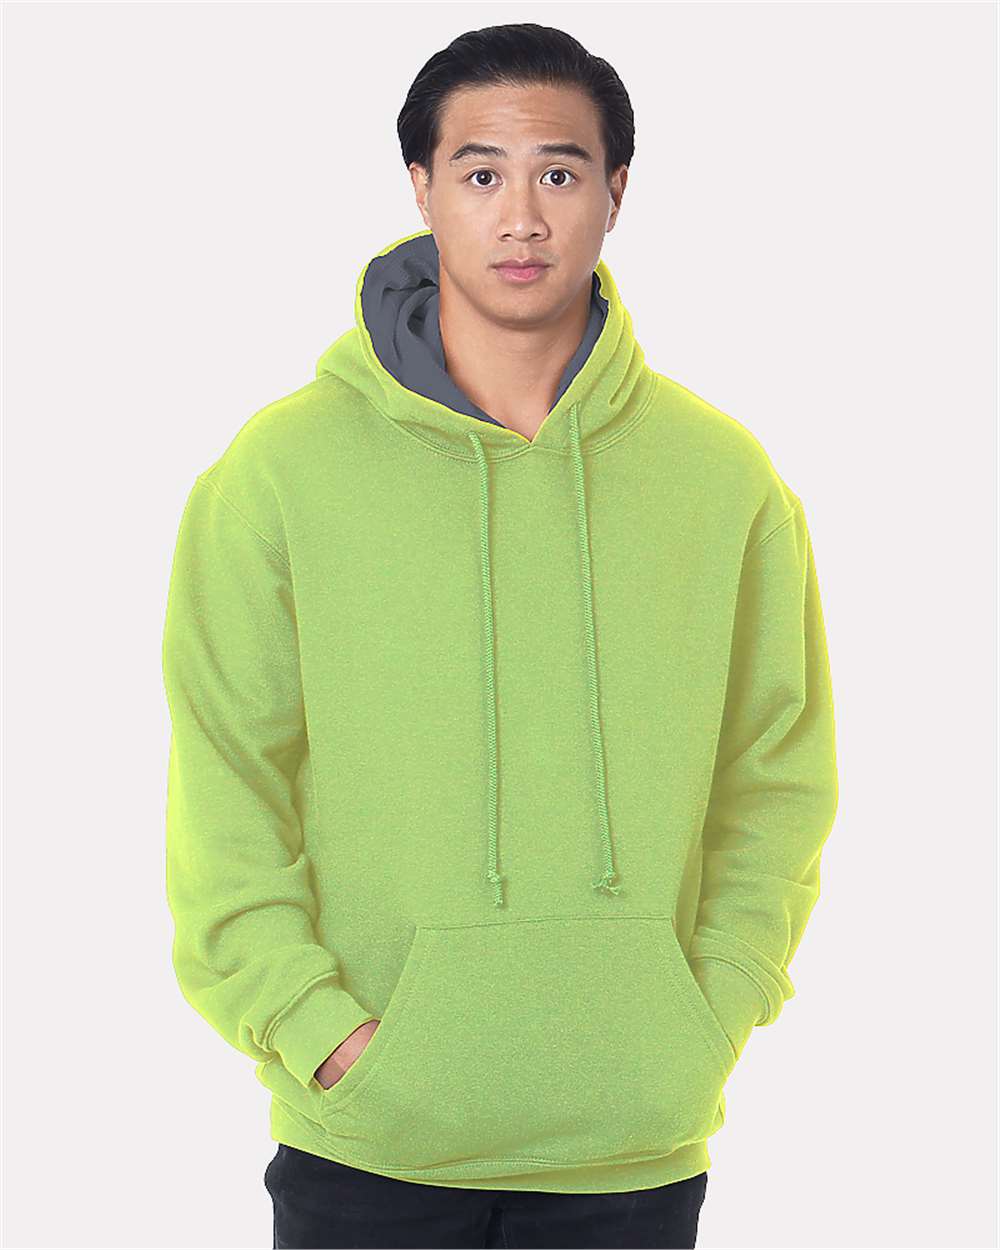 click to view Lime Green/ Dark Grey